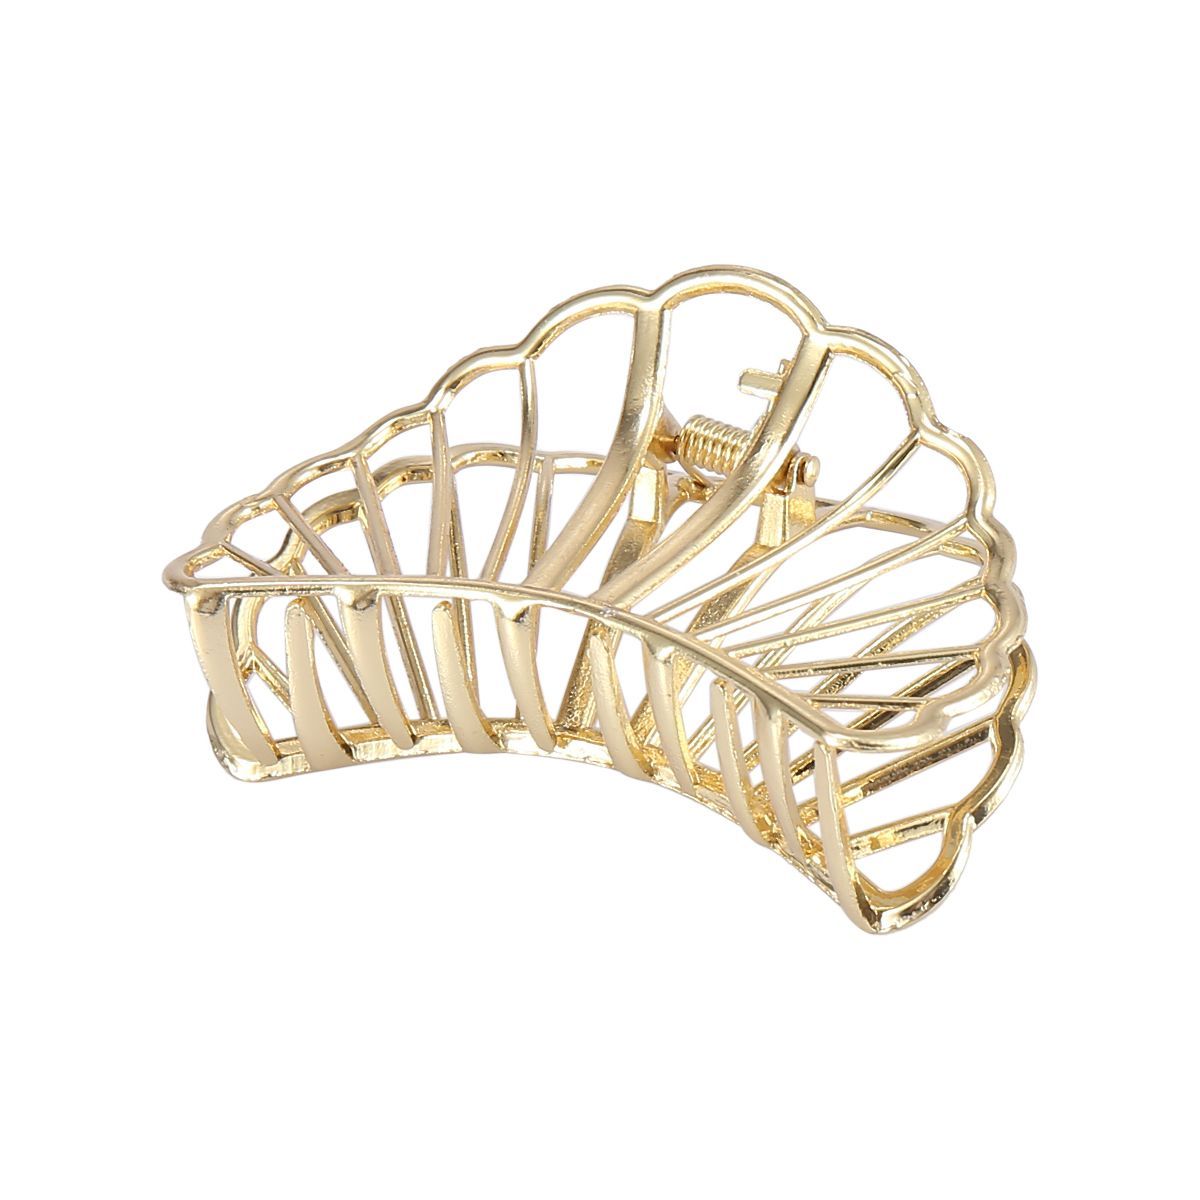 Unique Bargains Women's Metal Hair Clips Hair Barrettes Shell Shaped Claw for Fashion Accessories... | Target